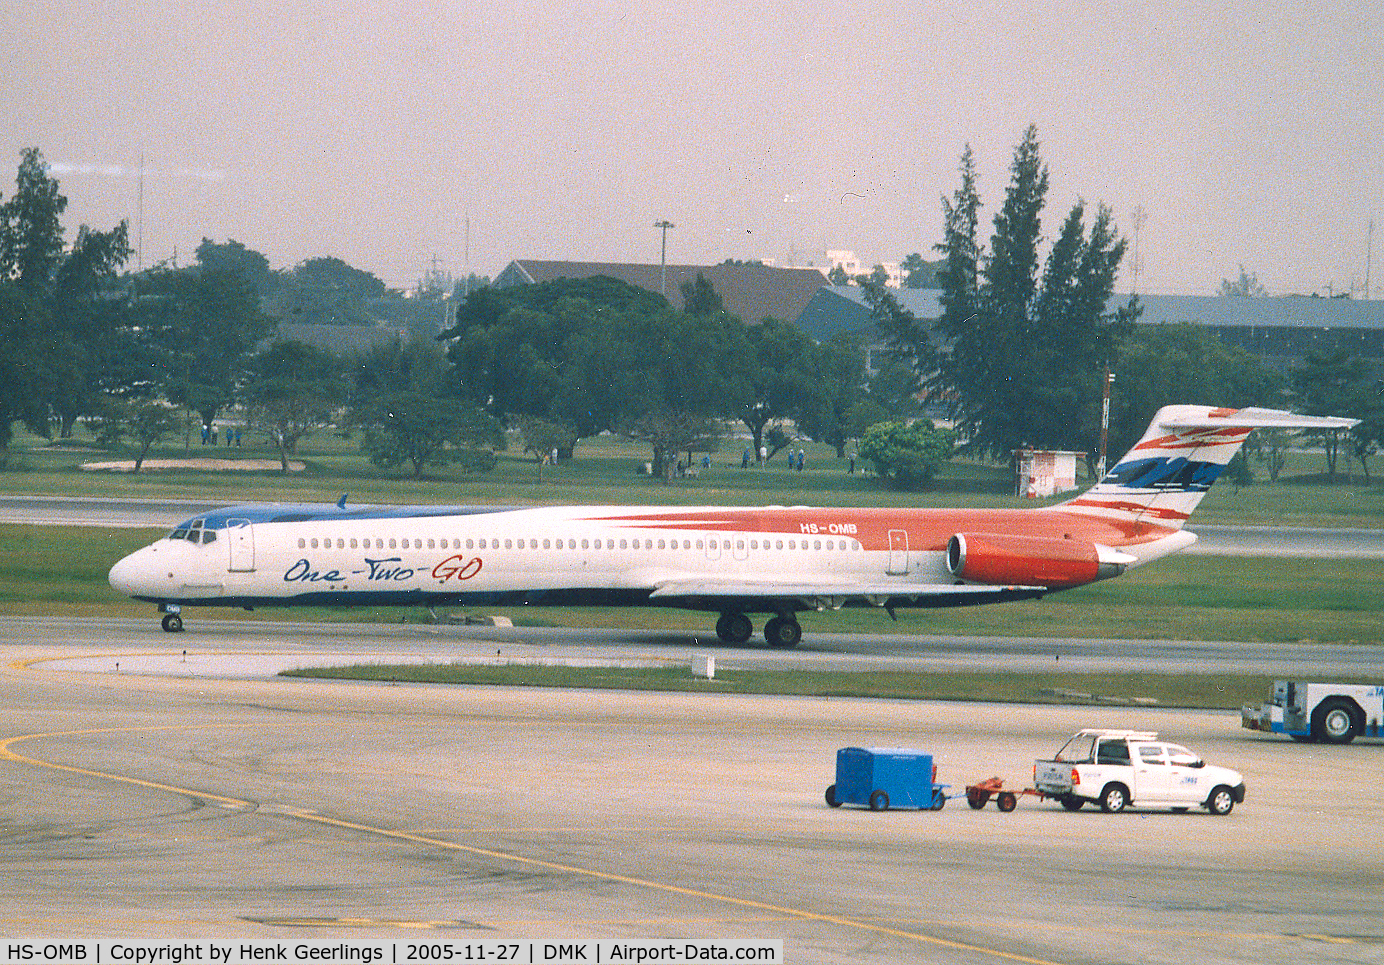 HS-OMB, 1986 McDonnell Douglas MD-82 (DC-9-82) C/N 49441, One-Two-Go , Don Muang Airport